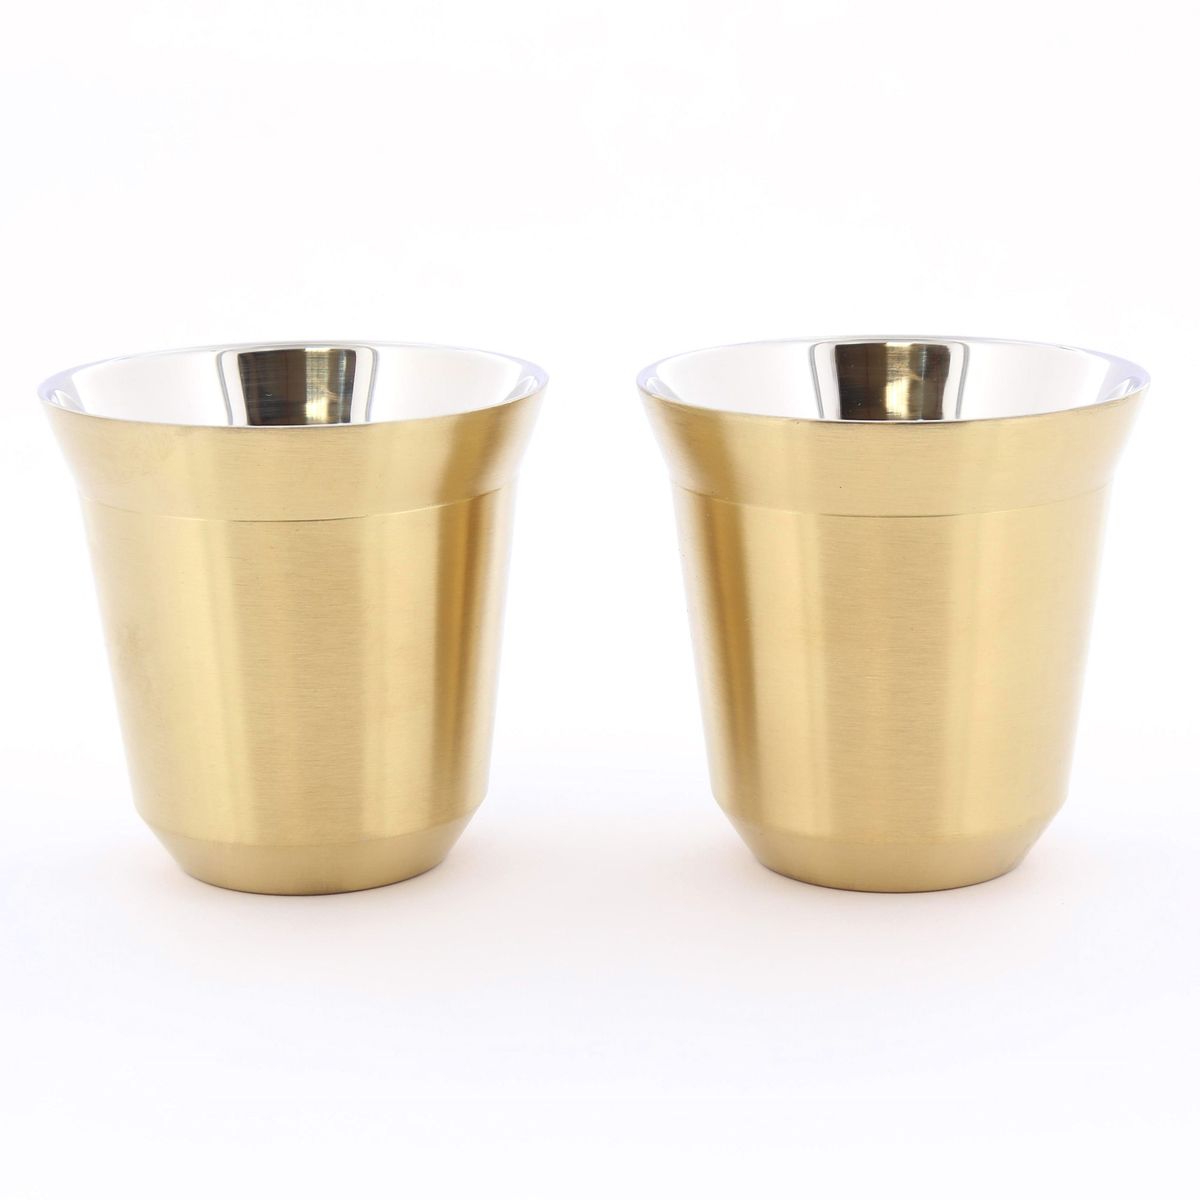 Rovatti Pola Stainless Steel Cup Gold 85ml